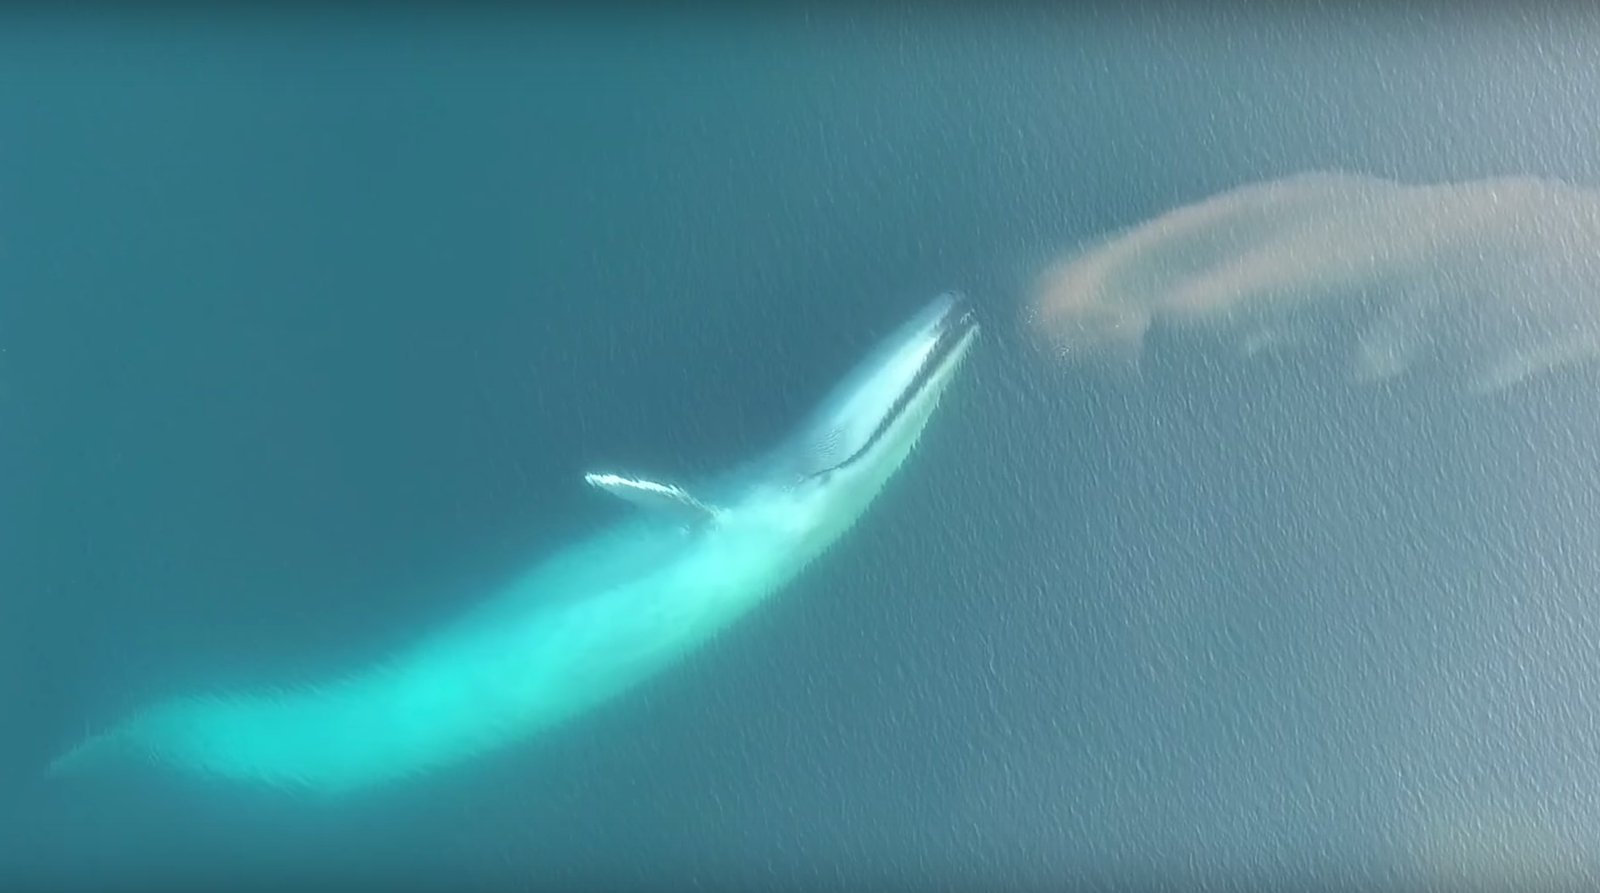 Blue Whale about to eat a school of krill